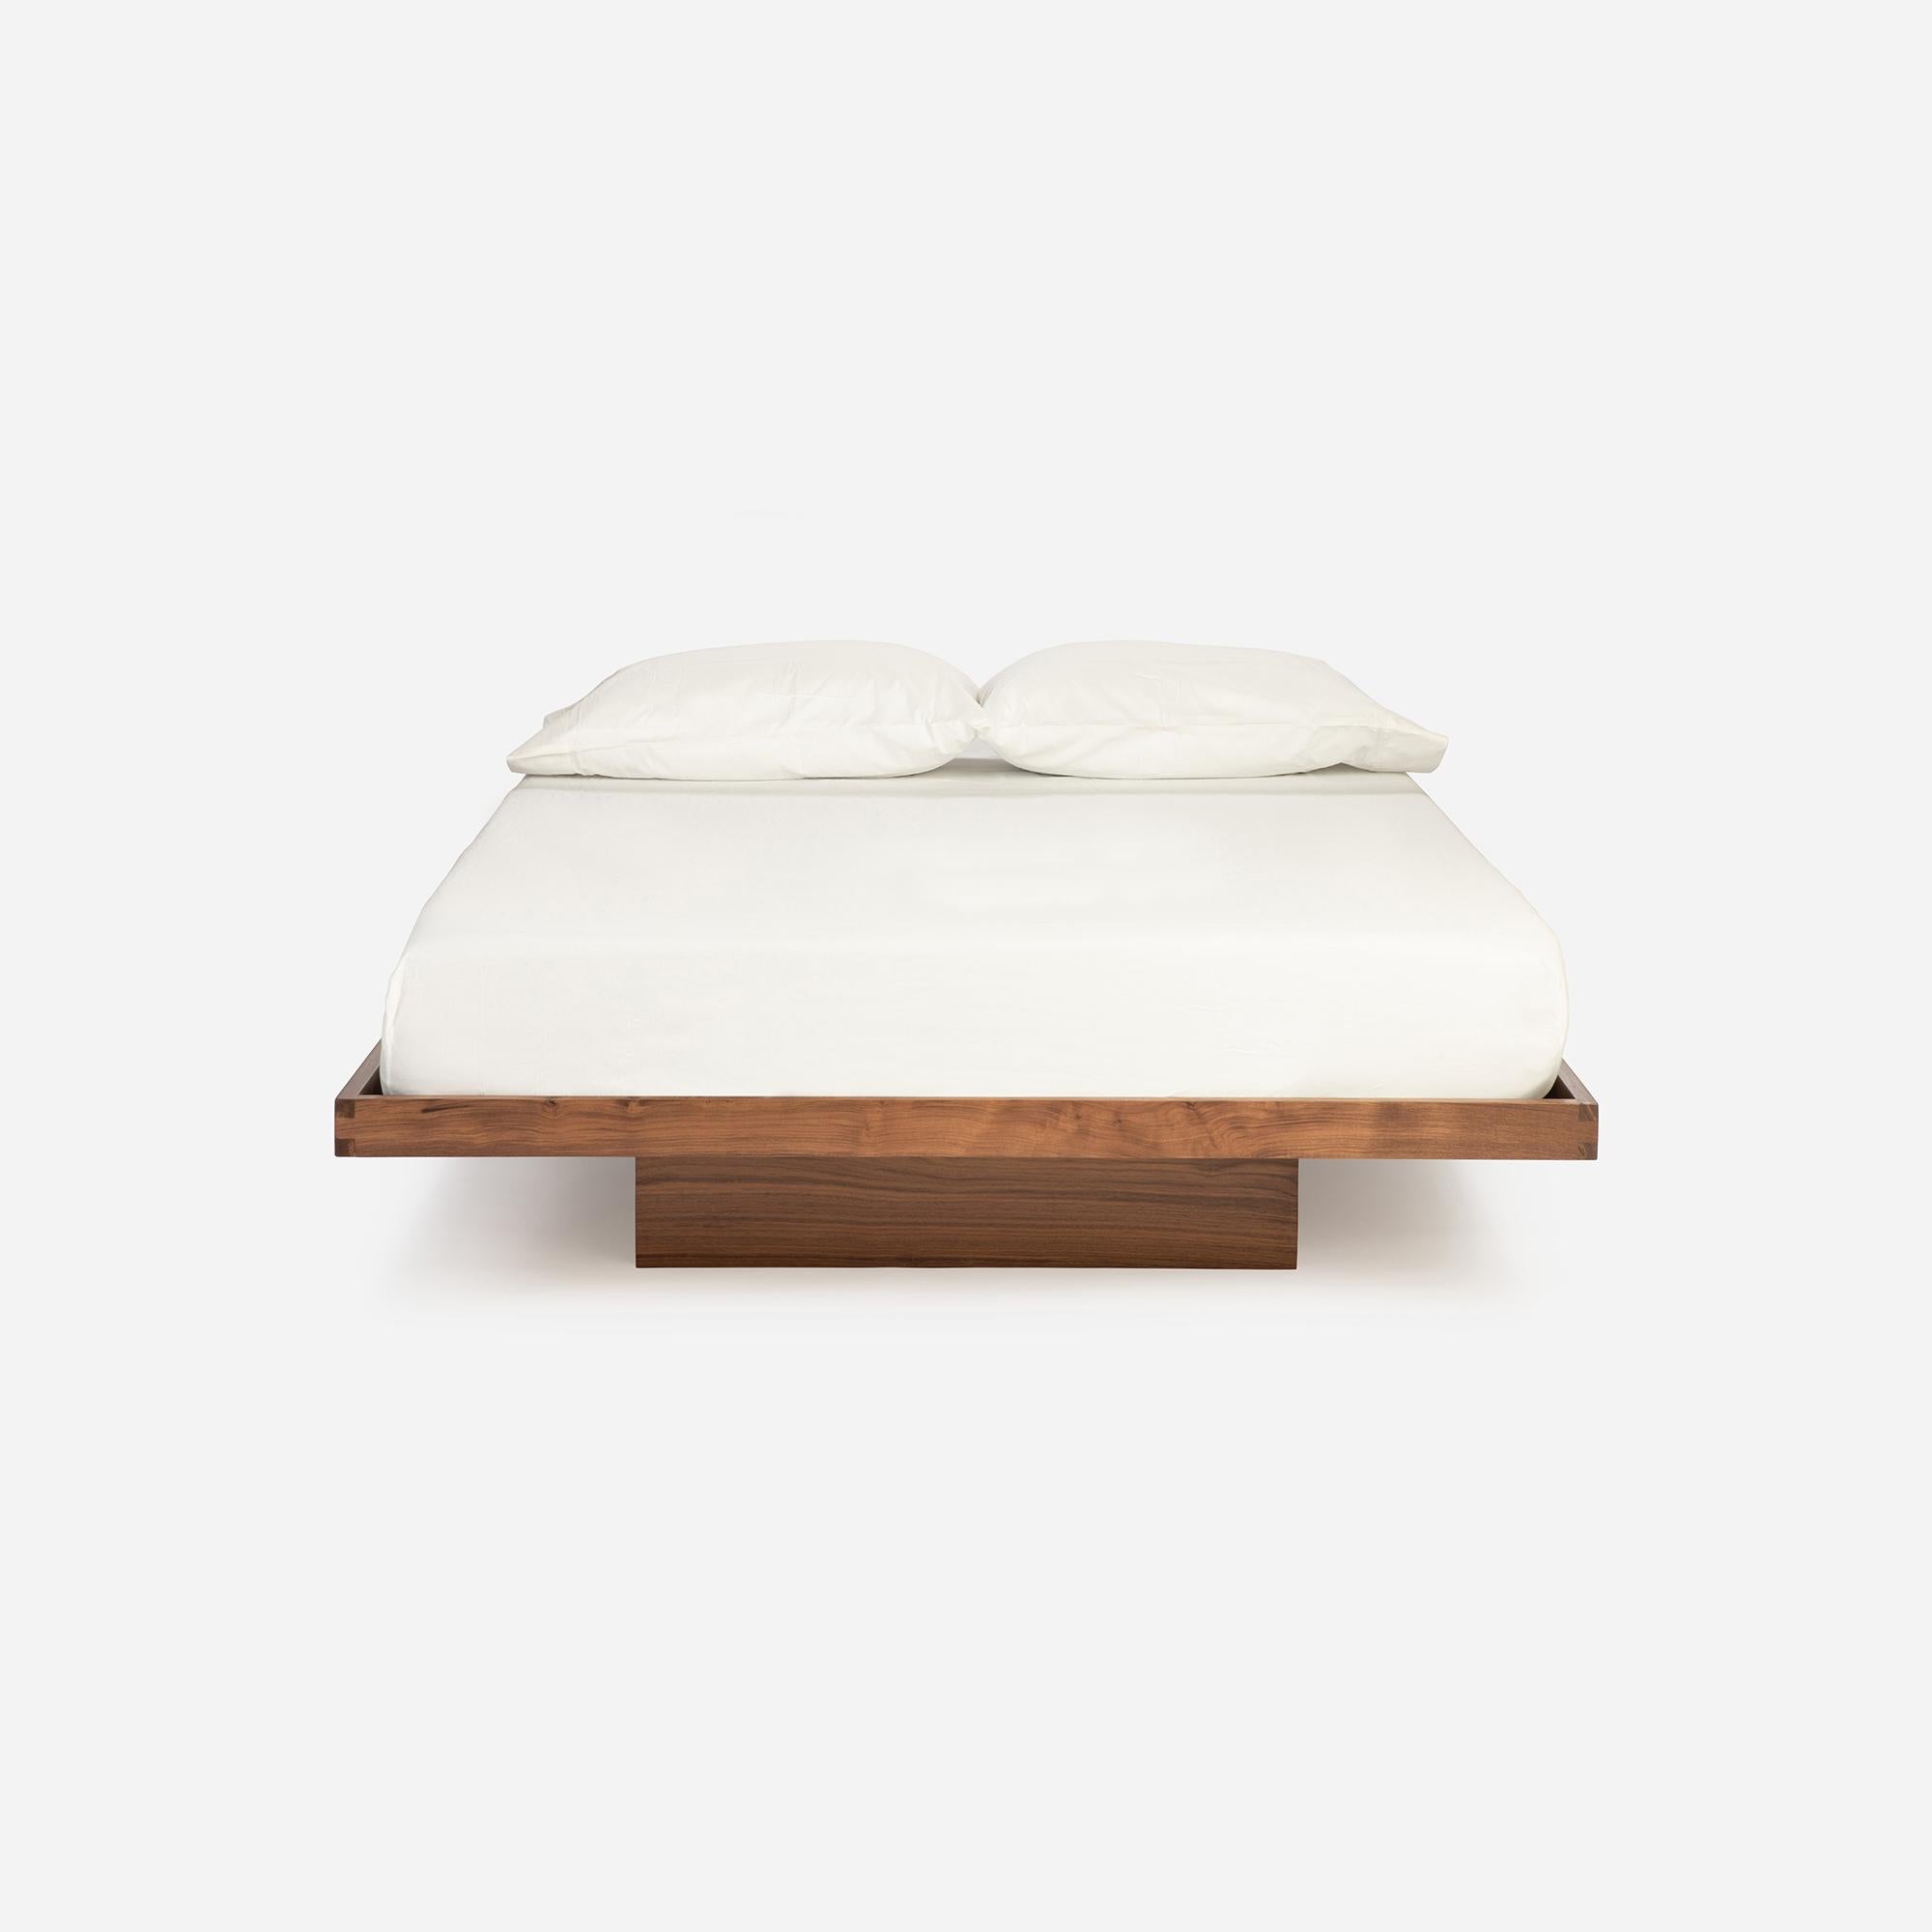 The Floating Platform Bed is a mid-century masterpiece. When Mel designed the platform bed, he focused on the Japanese term Shibui, he understood it to mean magnificent simplicity, elegance with good taste. It was a hit when first introduced, and